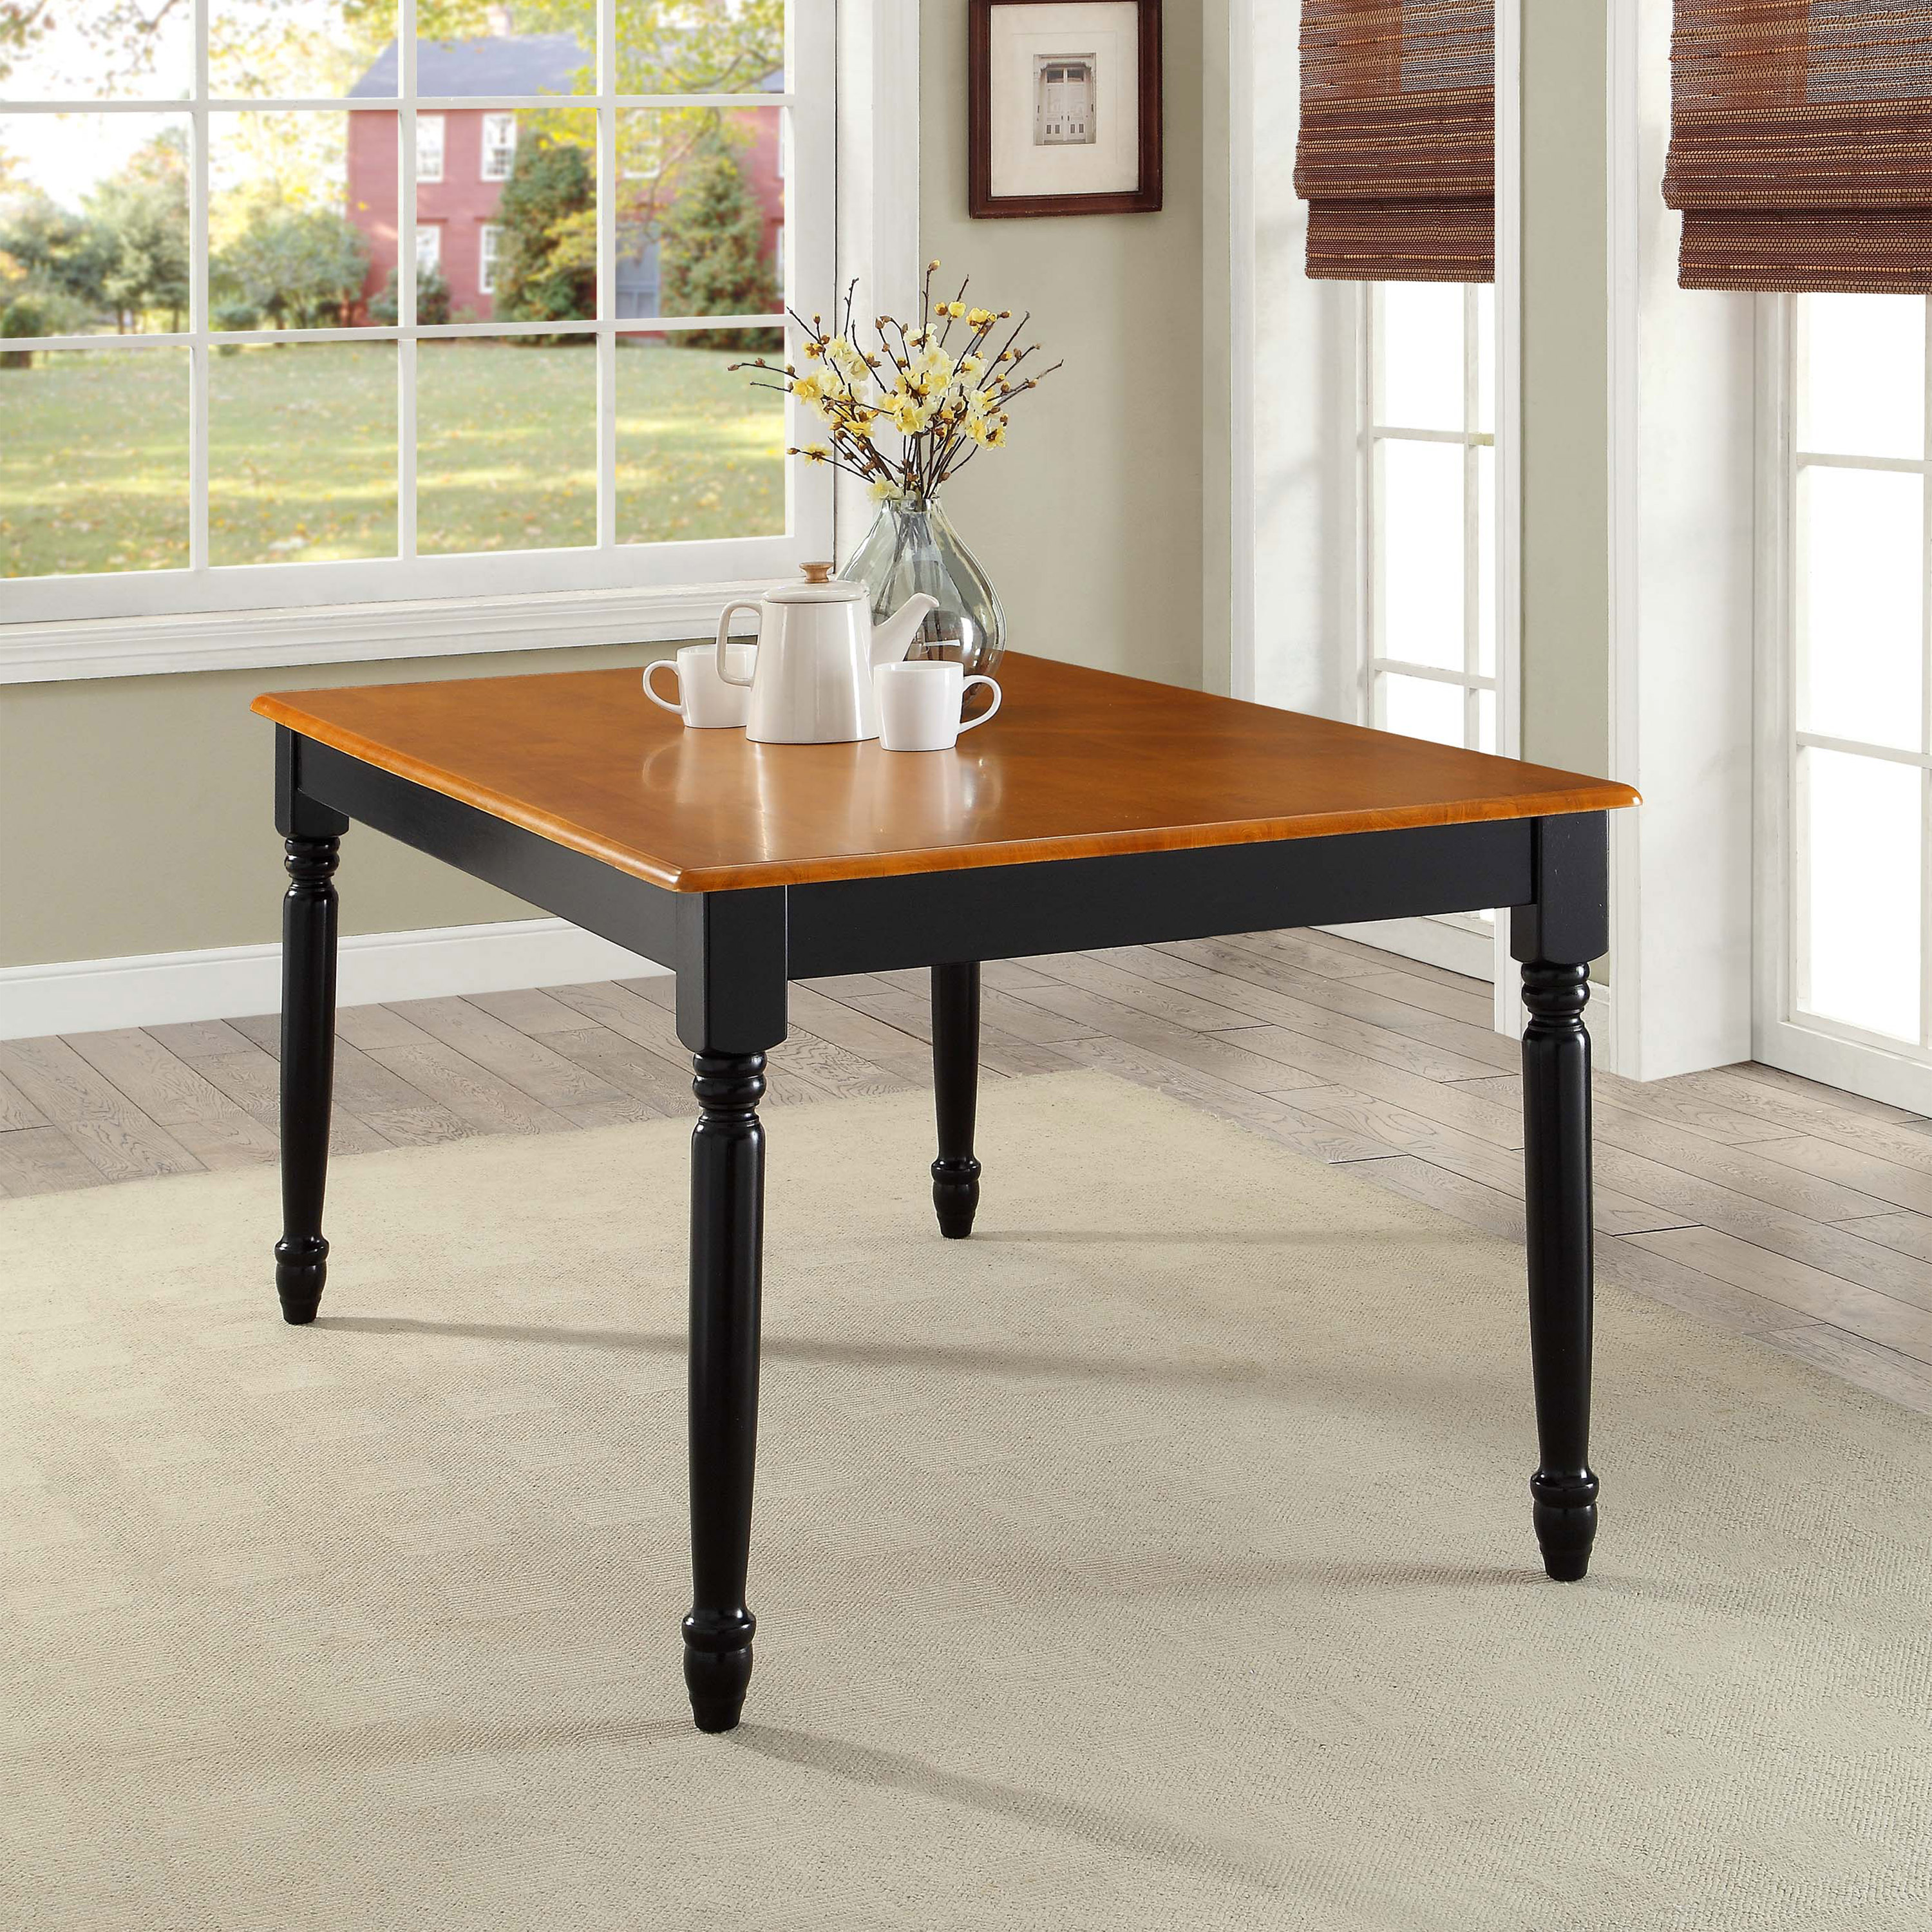 Better Homes and Gardens Autumn Lane Farmhouse Dining Table, Black and Oak - image 1 of 8